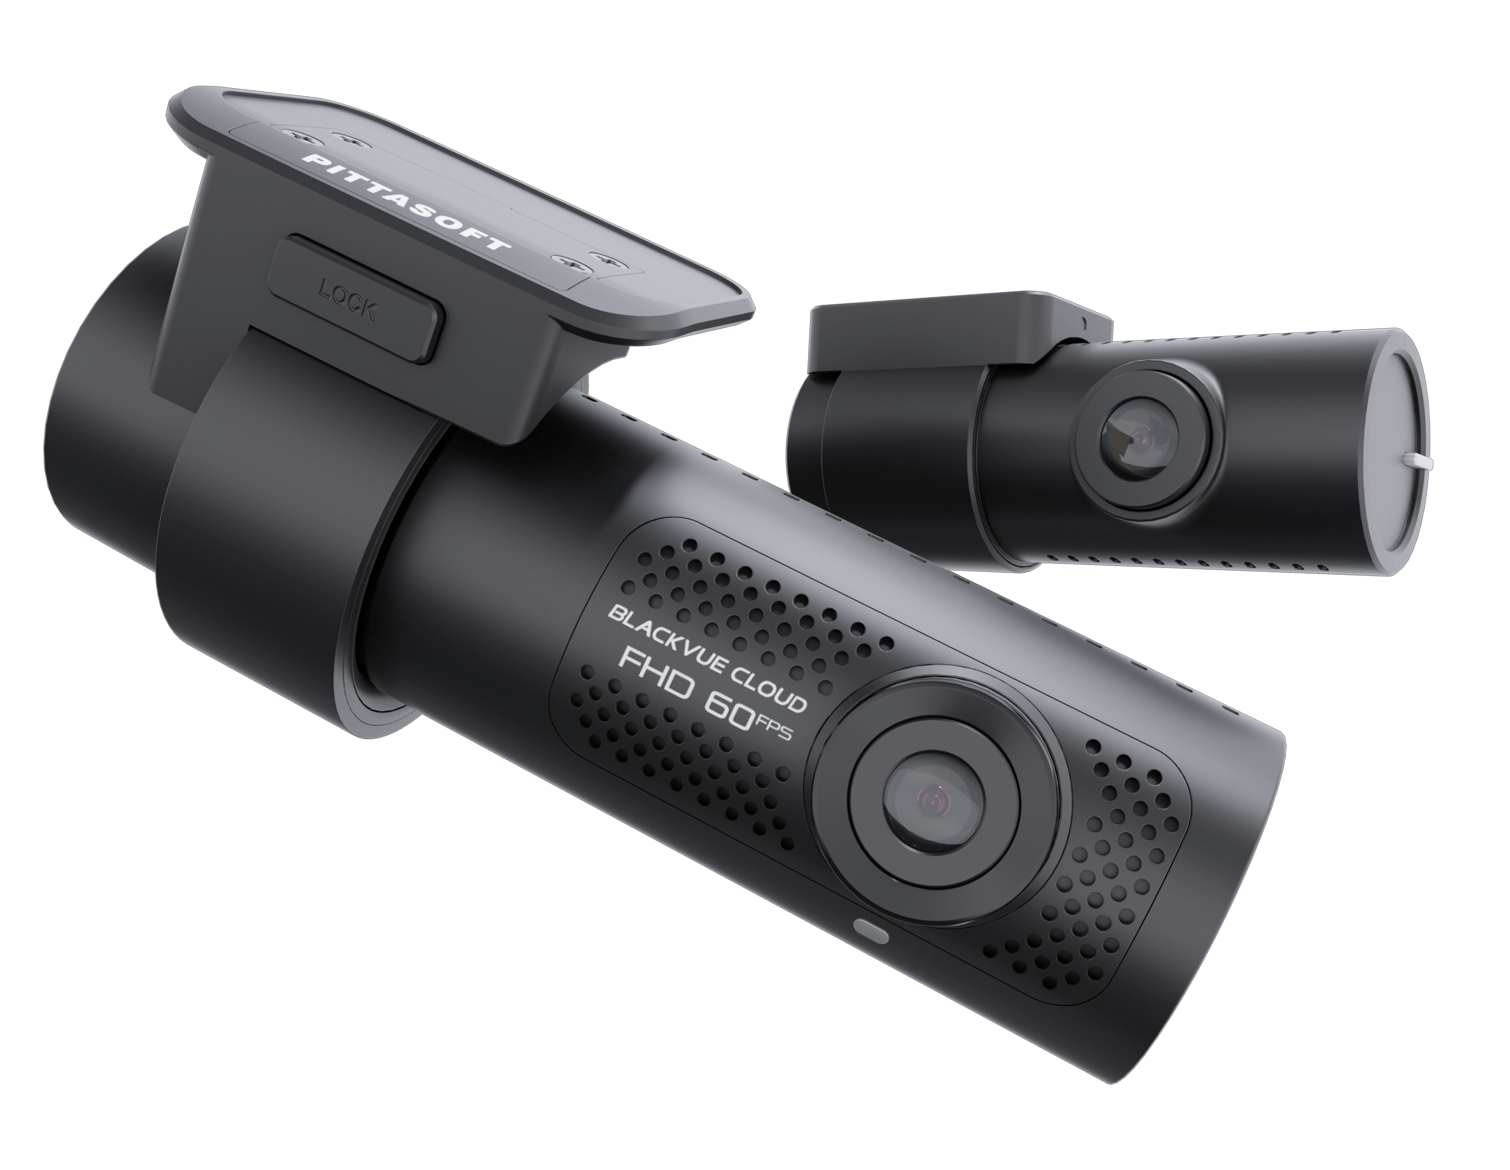 BlackVue DR770X 2CH - Full HD 60FPS Front and Rear Dash Cam